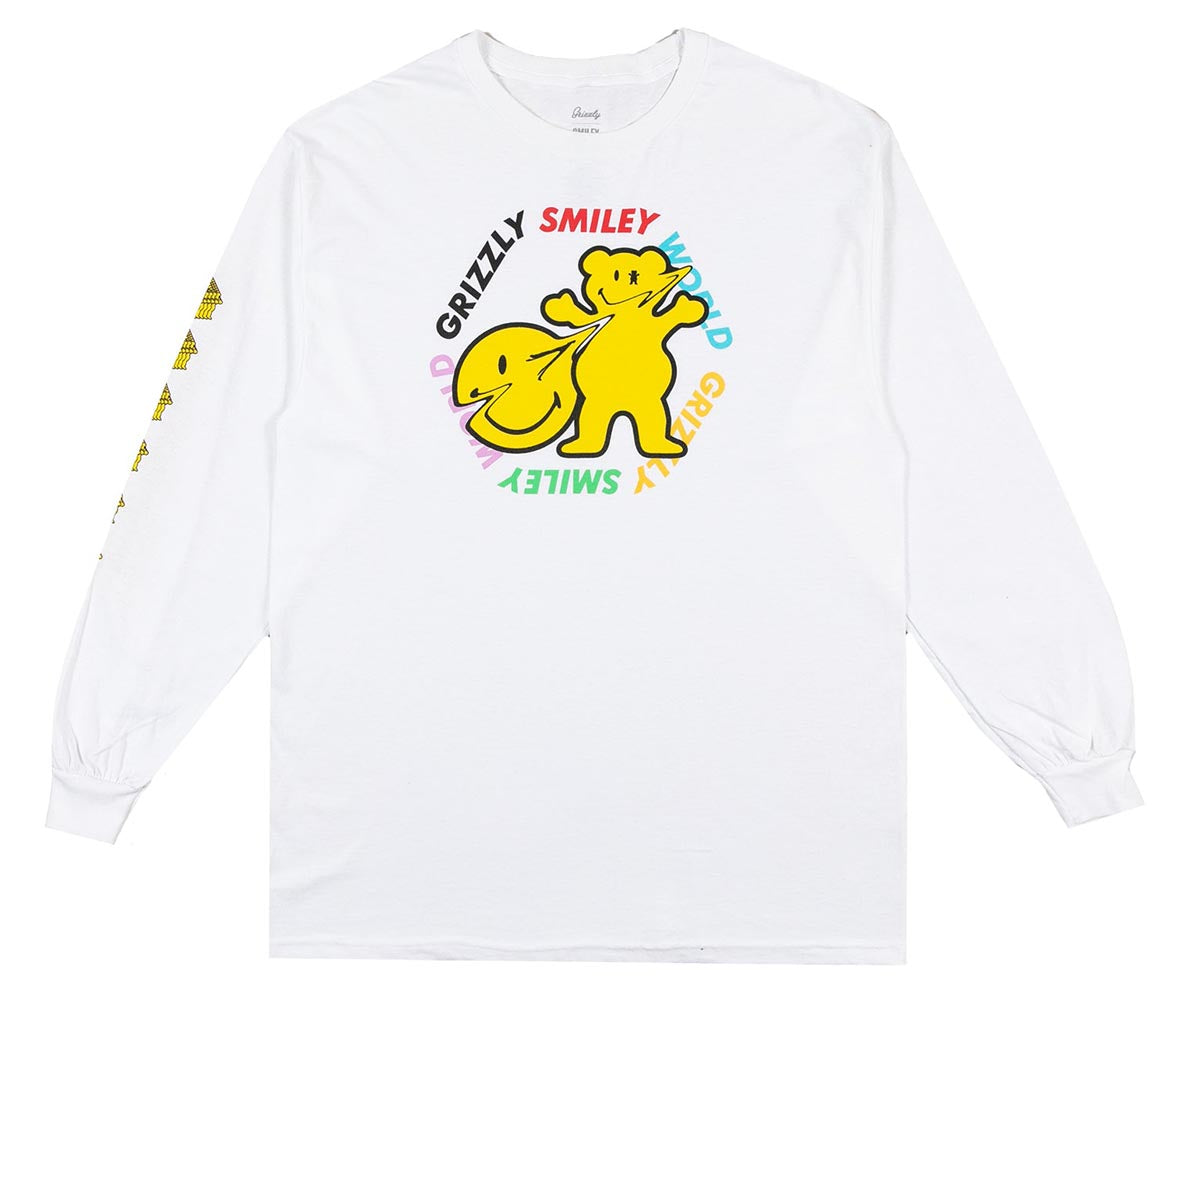 Grizzly x Smiley World Long Sleeve T-Shirt - White image 1